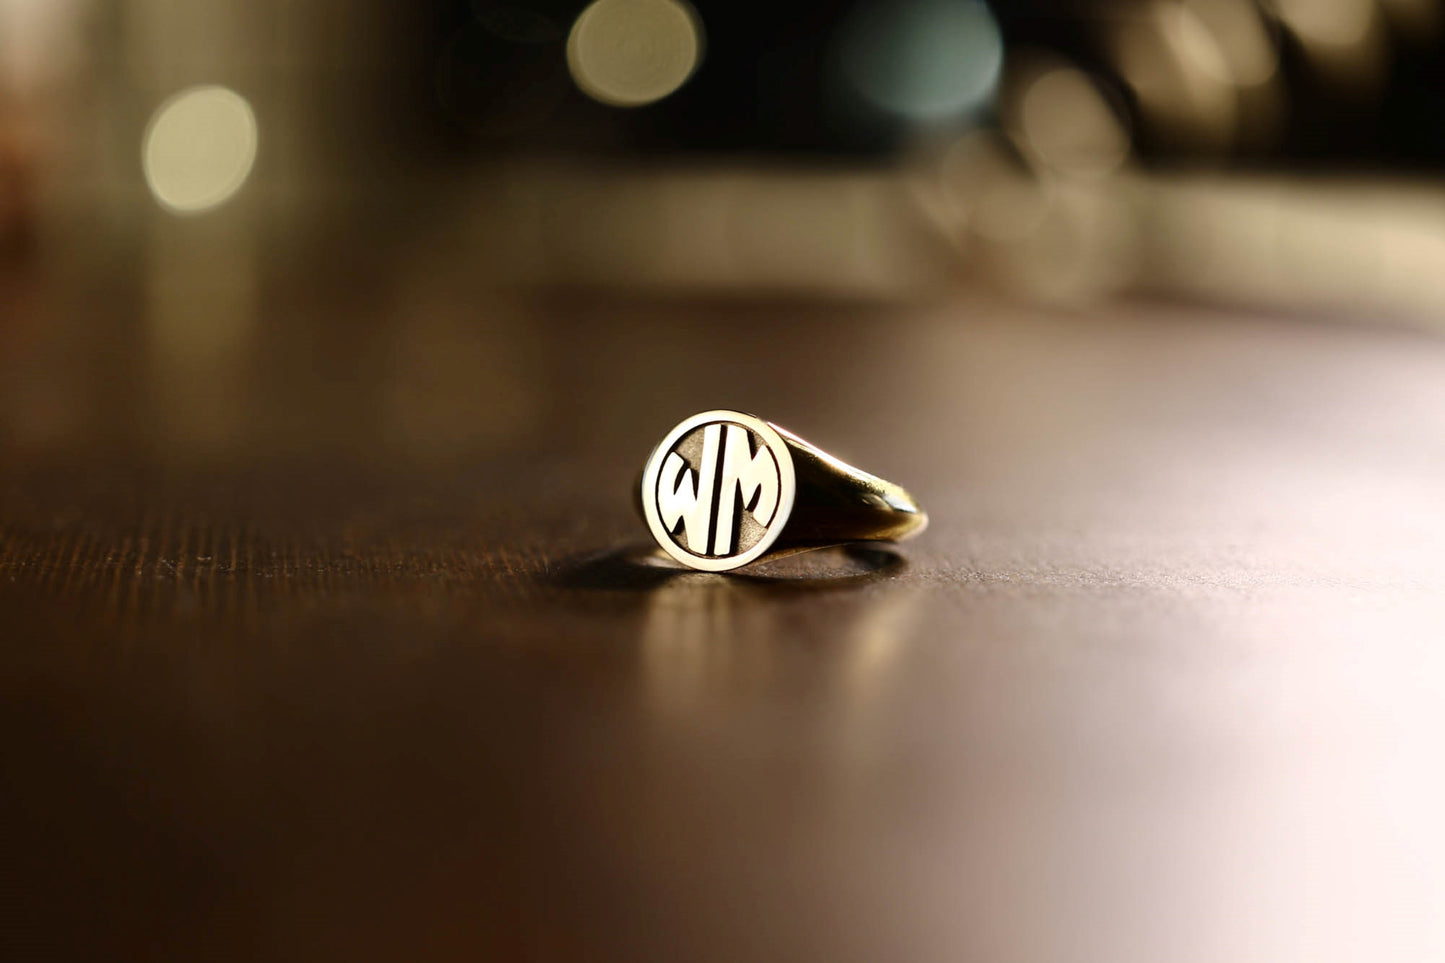 Silver Monogram Ring with Initials